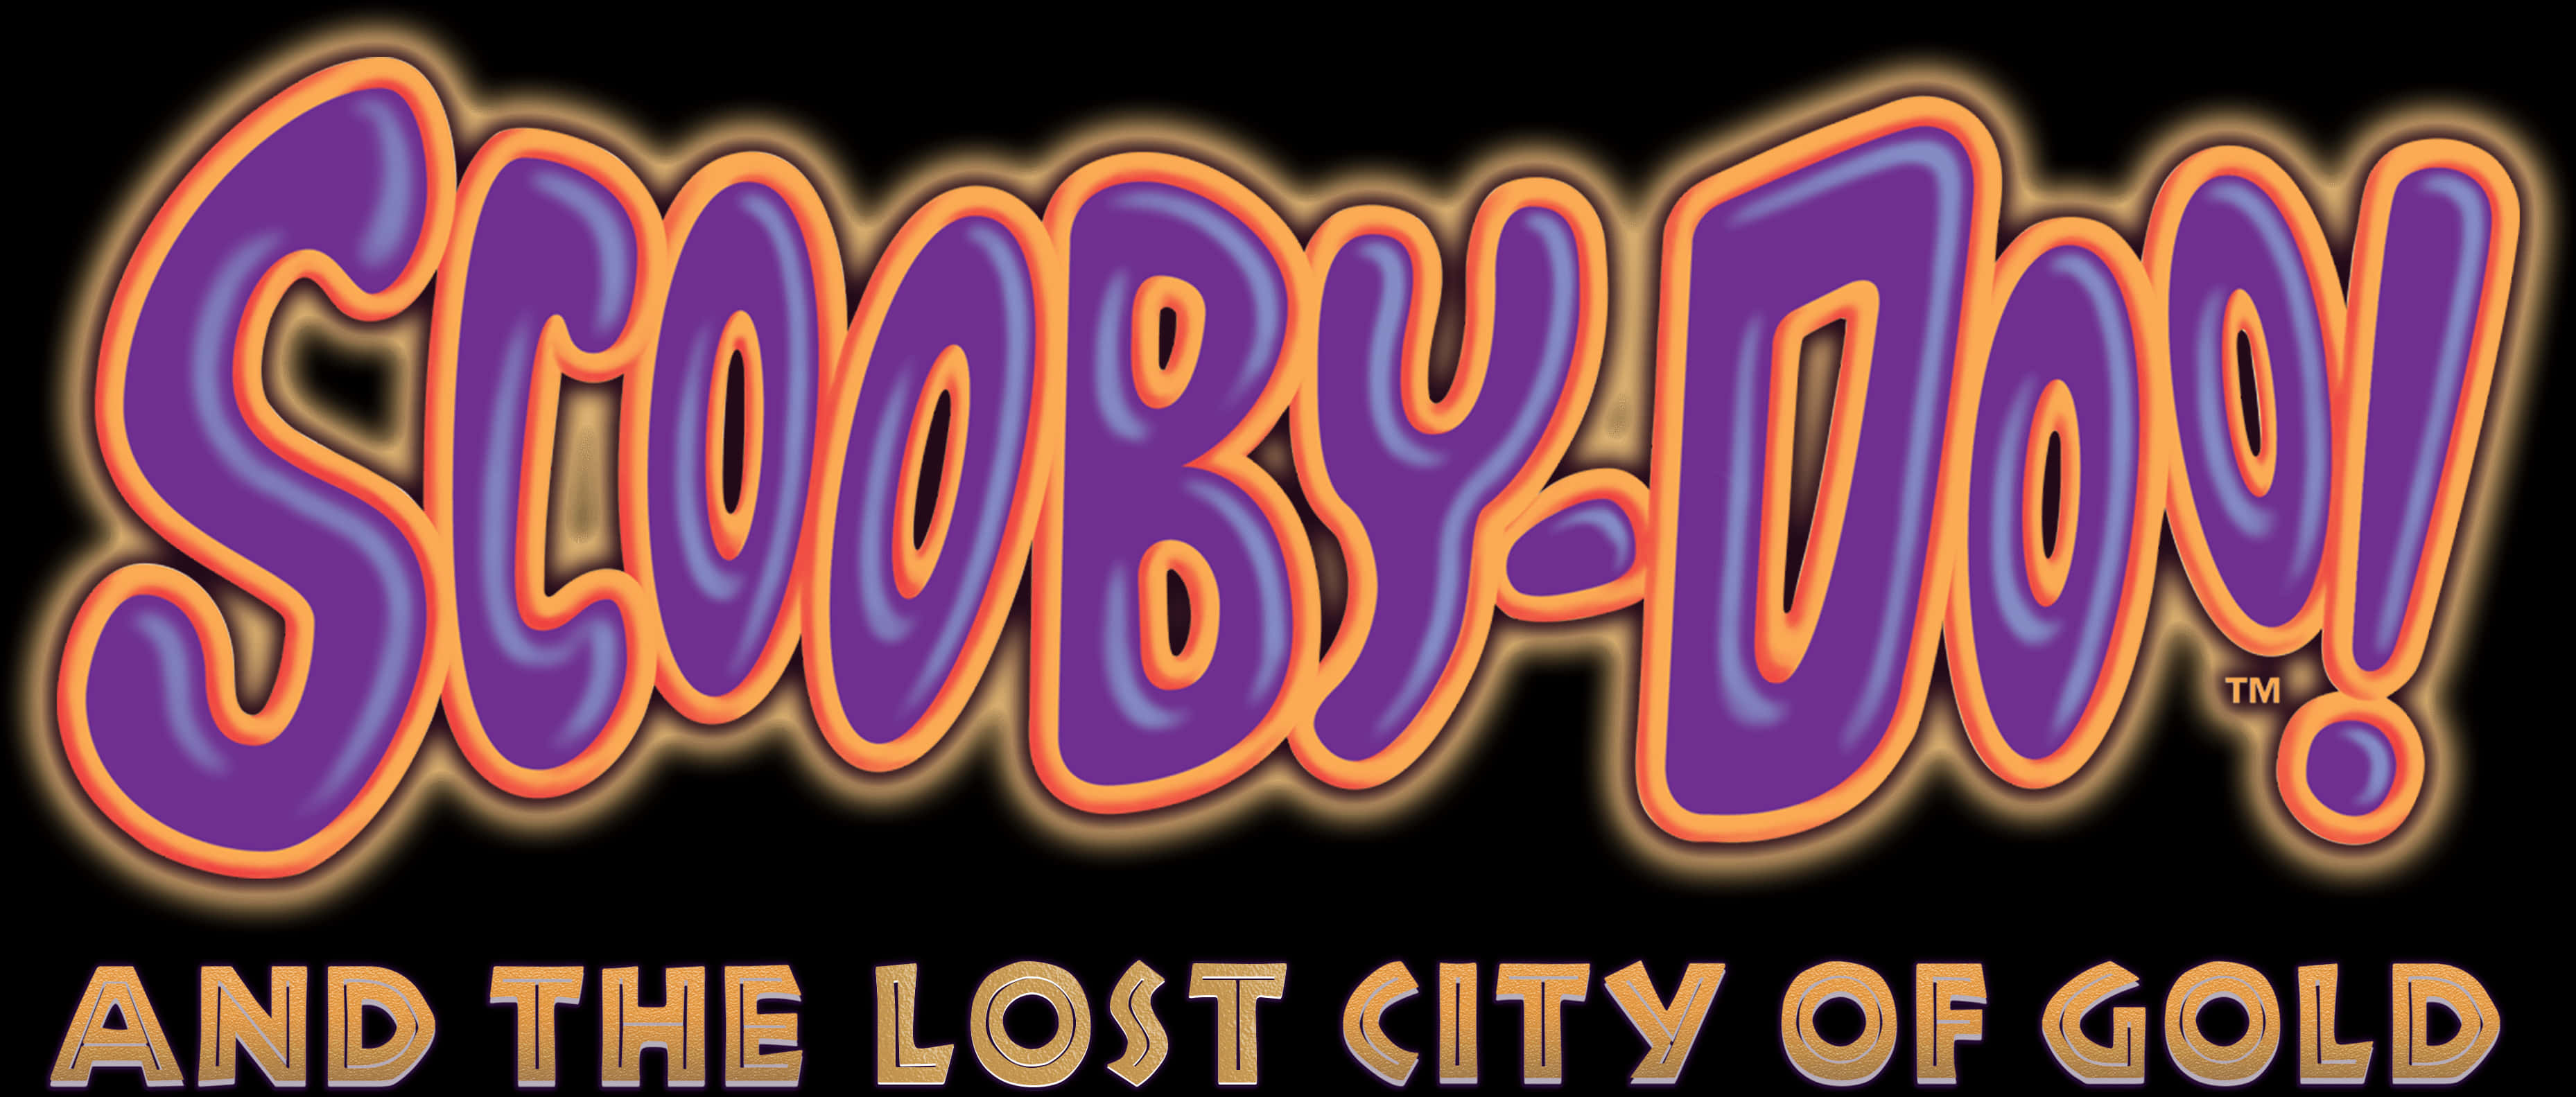 Scooby Doo Lost Cityof Gold Logo